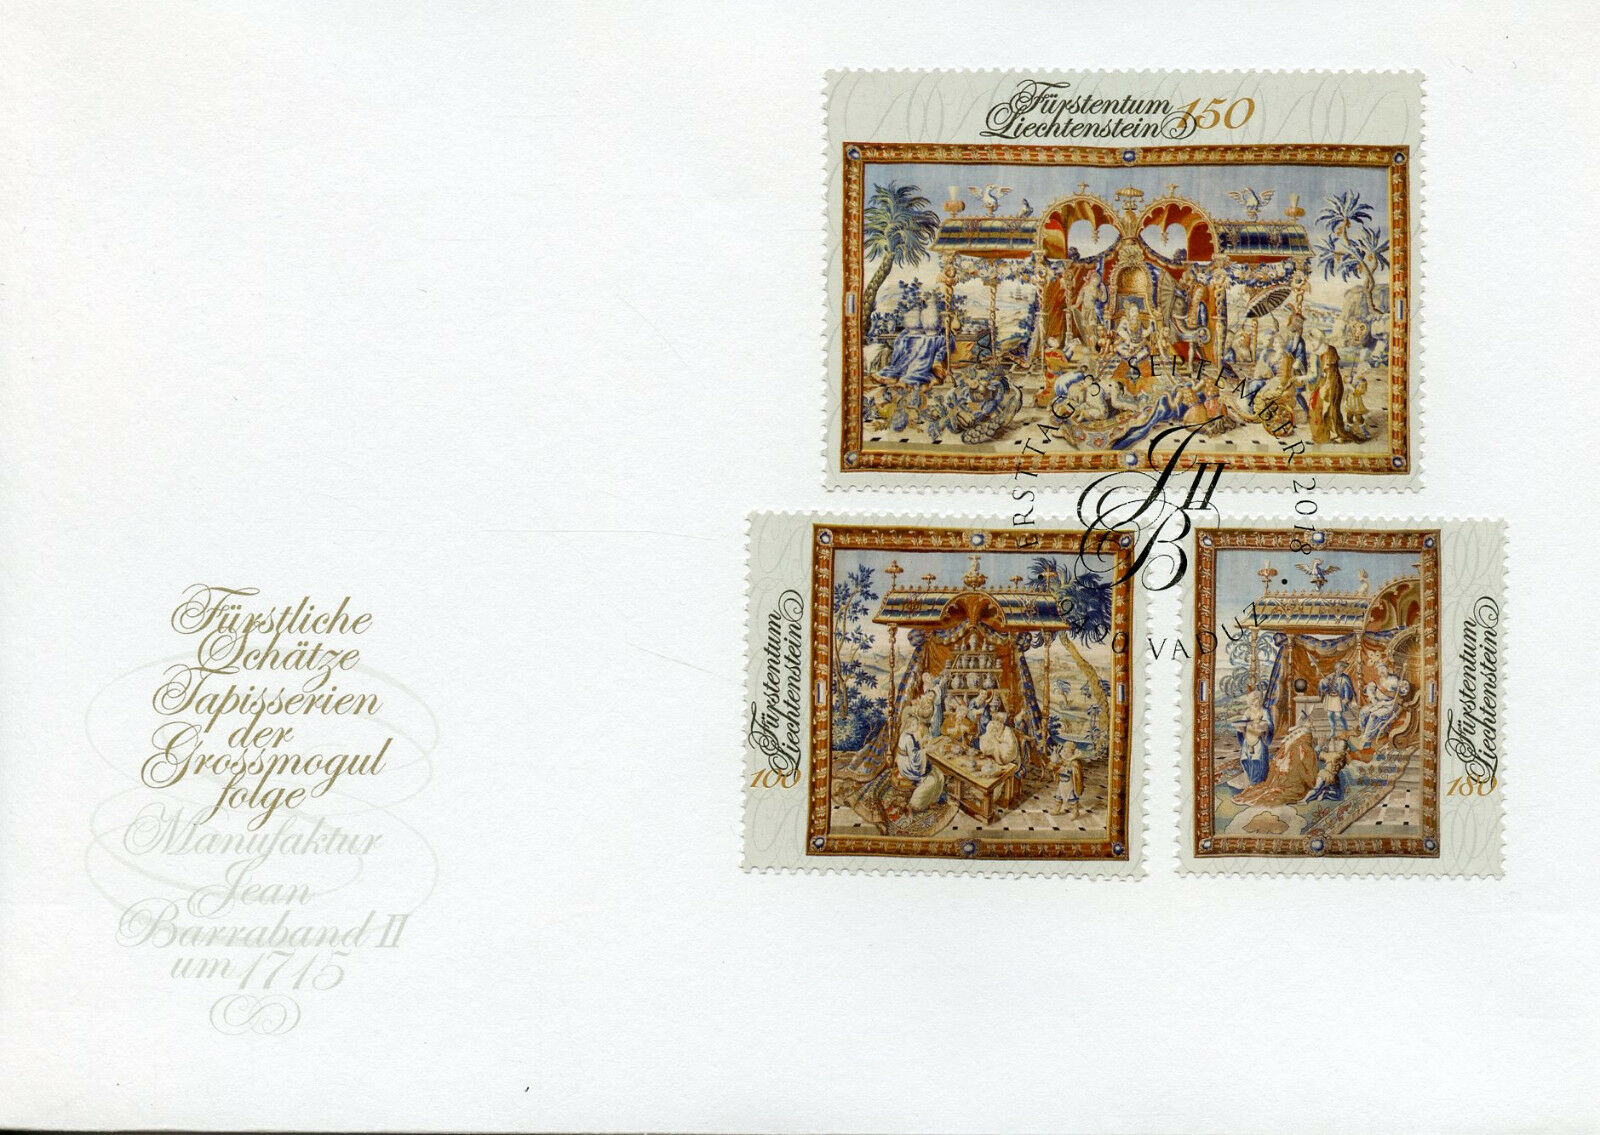 Liechtenstein 2018 FDC Princely Treasures Tapestries 3v Cover Art Culture Stamps